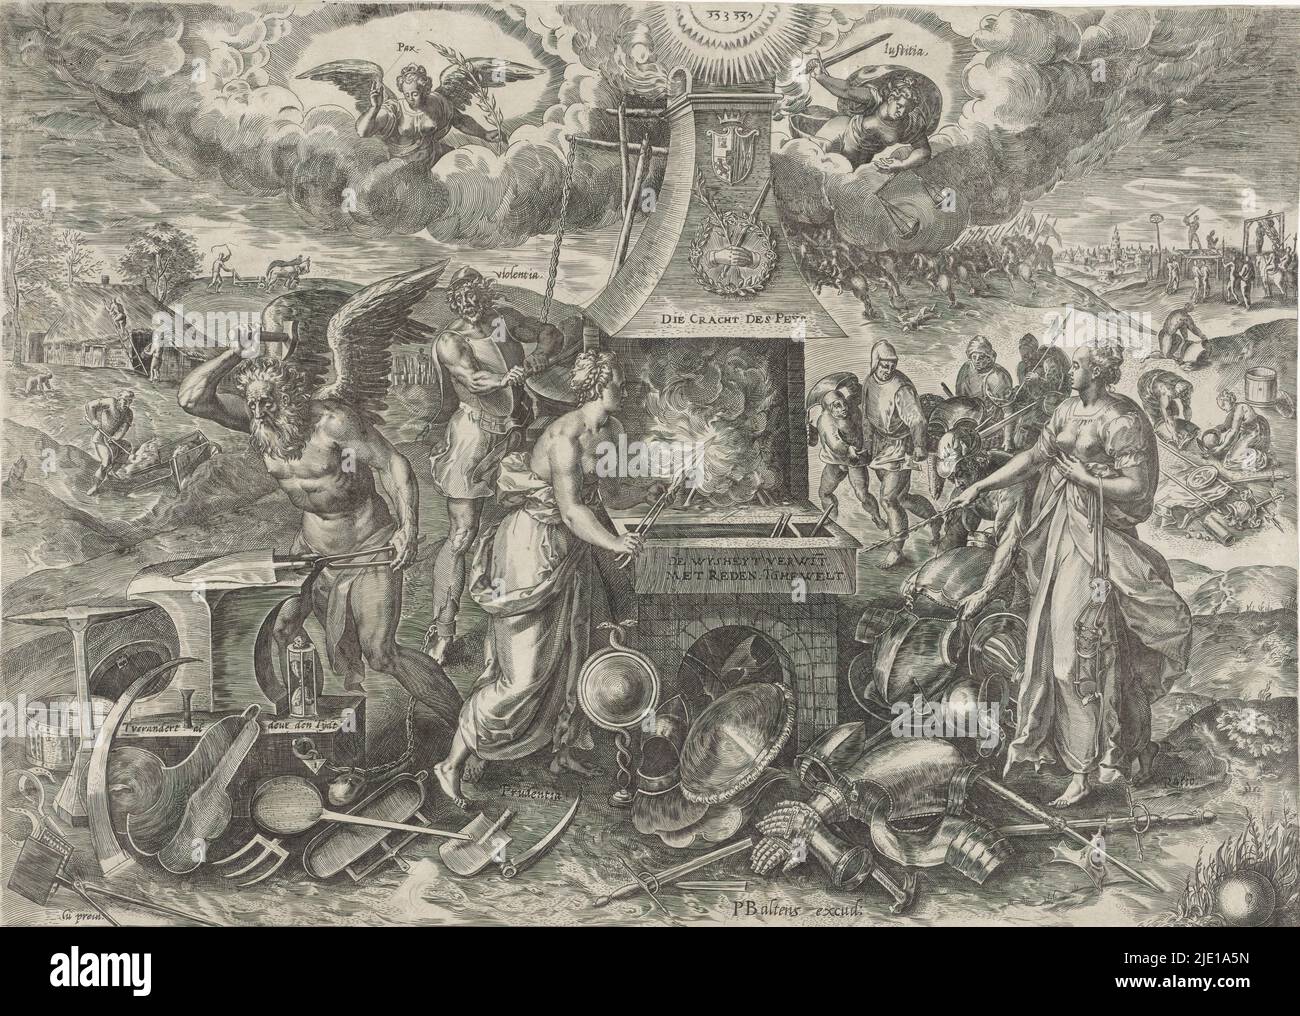 The power of peace, 1577, Die Cracht des Peys (title on object), Allegories on the renewed period of peace in the Netherlands (series title), Allegory on the peace concluded with the Eternal Edict of 1577. Prudence (Prudentia) forges swords into plowshares in a furnace. She is helped by Reason (Ratio). On the chimney the coat of arms of Don Juan. Father Time forges agricultural tools from weapons and armor. Violence (Violentia) is chained to the anvil and is forced to help stoke the furnace. In the right background, the end of the war is depicted. On the left in the background, fields are bein Stock Photo